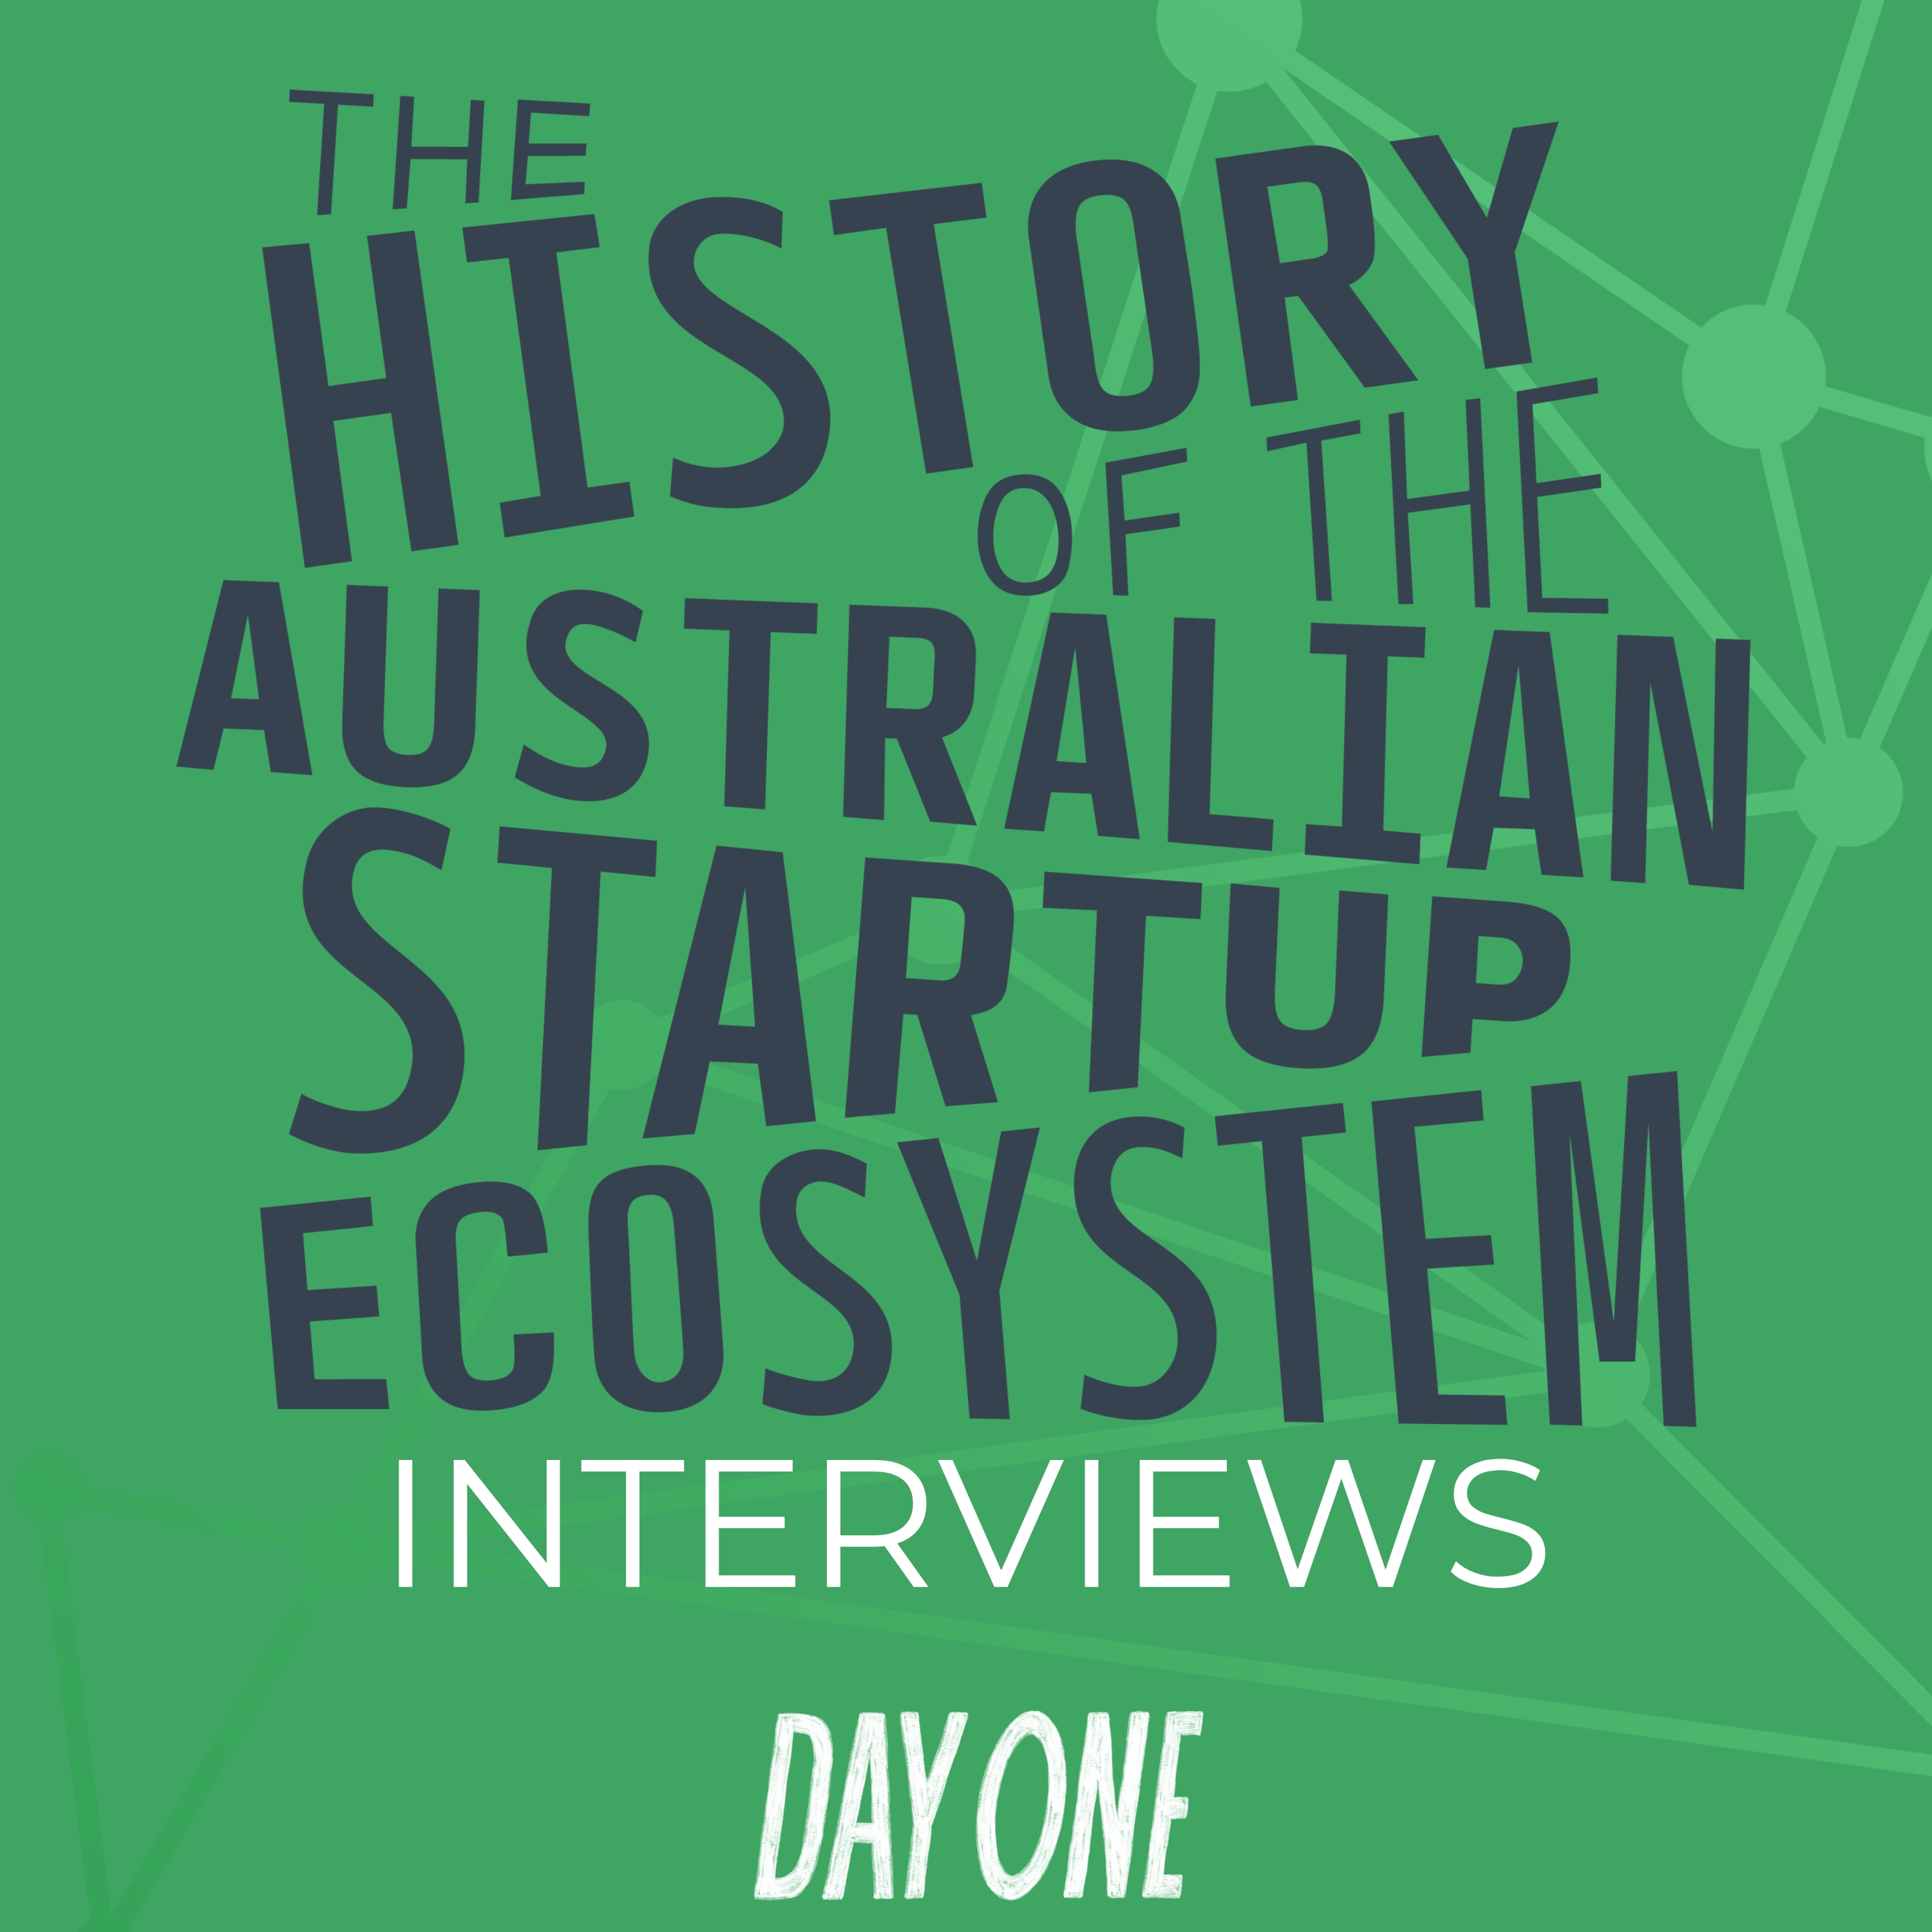 Joshua Flannery discusses the key differences between Australia and Japan's startup ecosystems